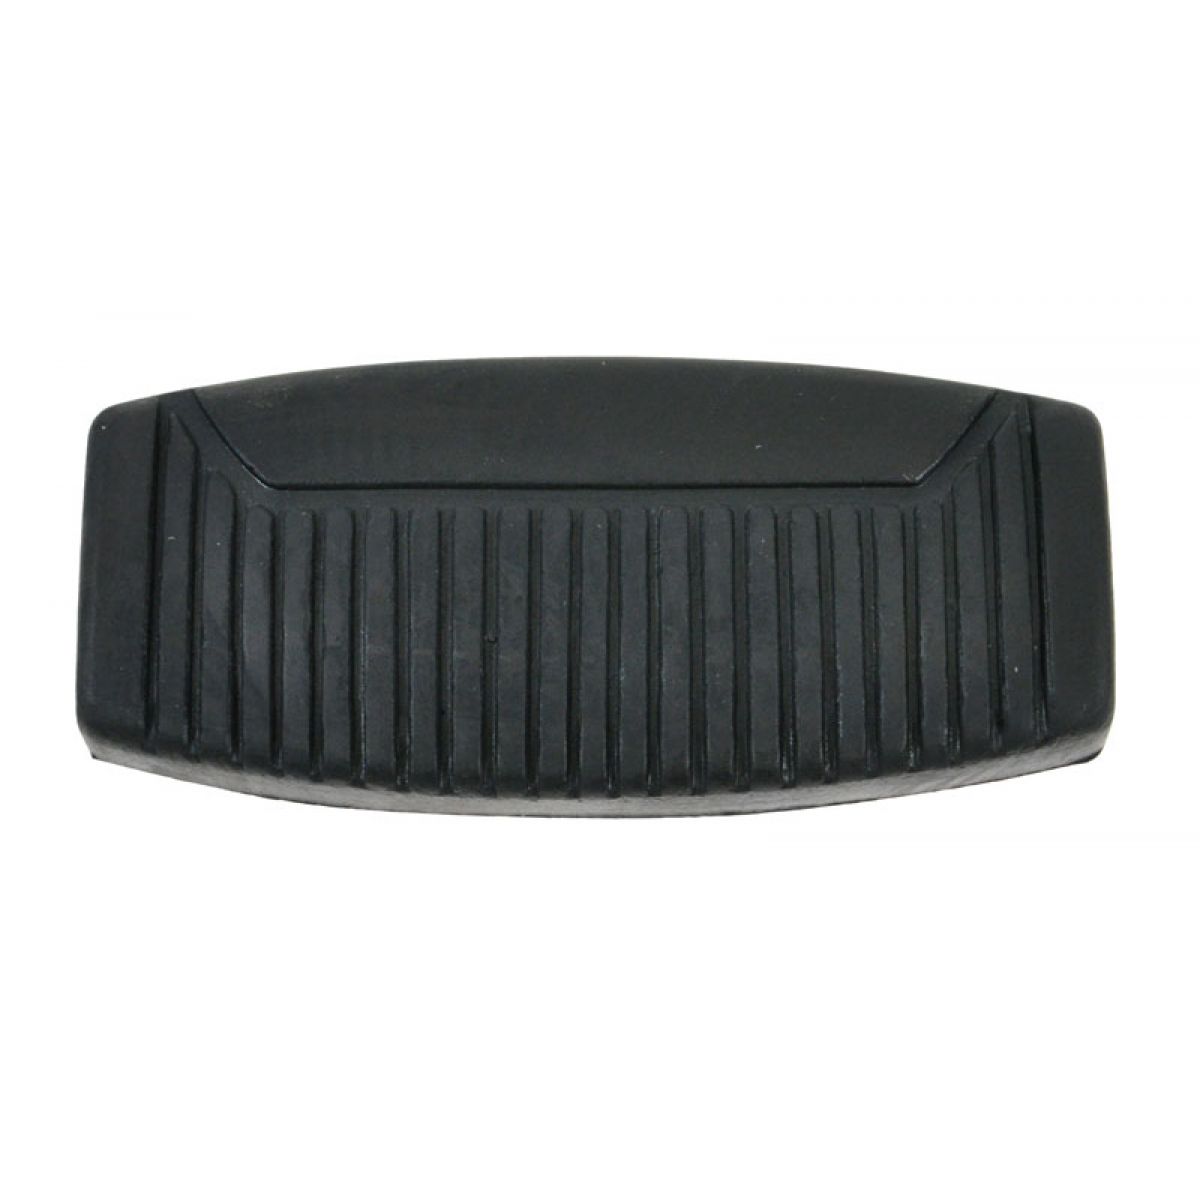 Ford brake pedal covers